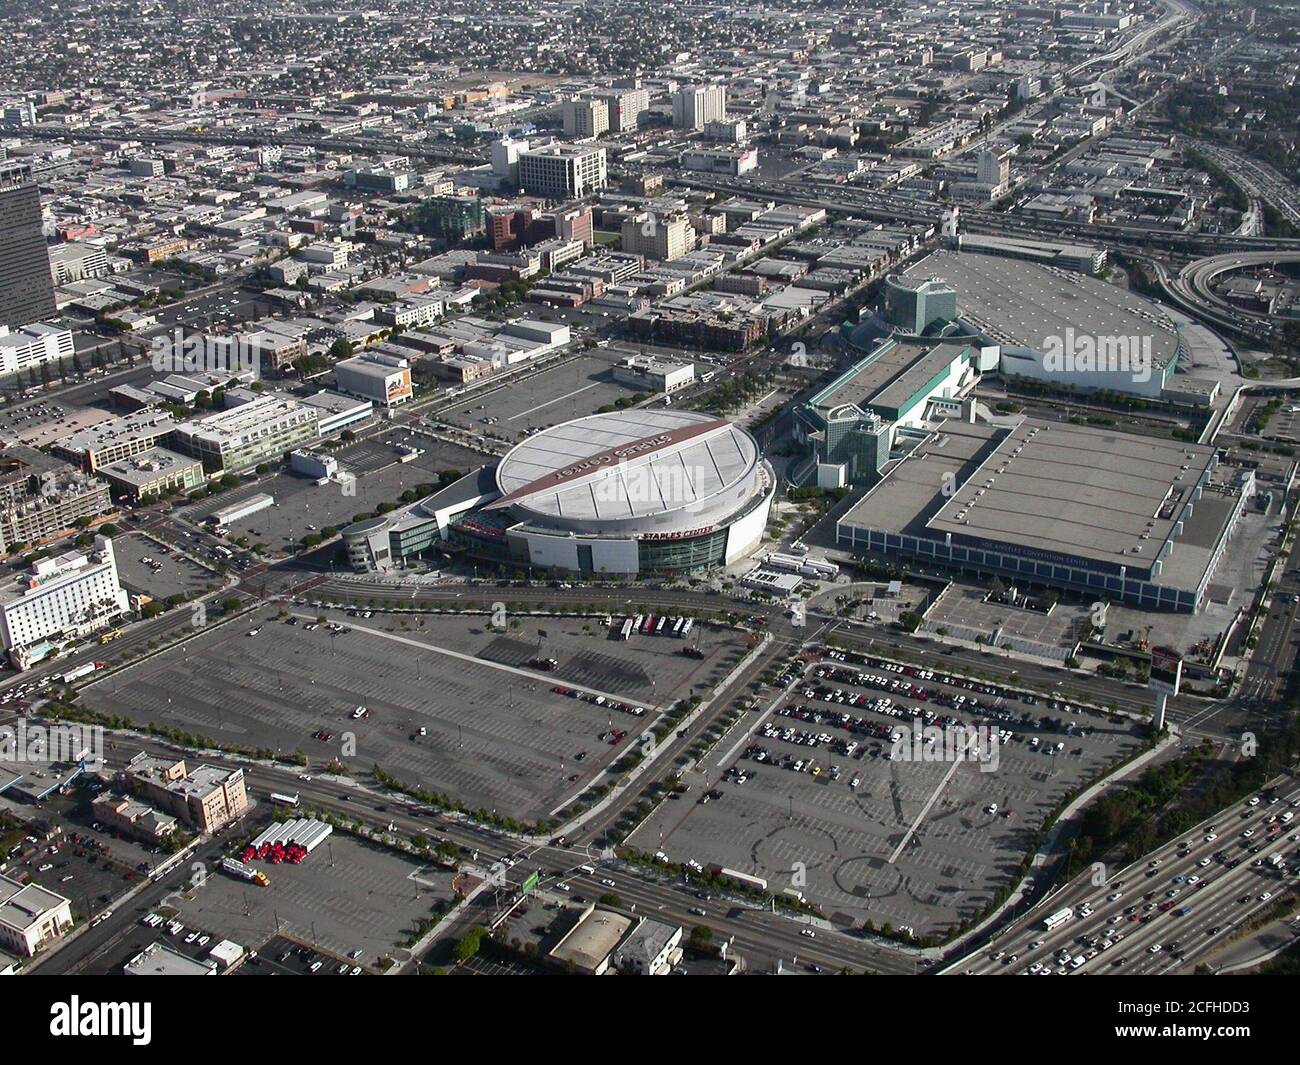 Los Angeles, California, USA - May 26, 2004:  Archival aerial view of Staples Center and the Los Angeles Convention Center in downtown Los Angeles. Stock Photo